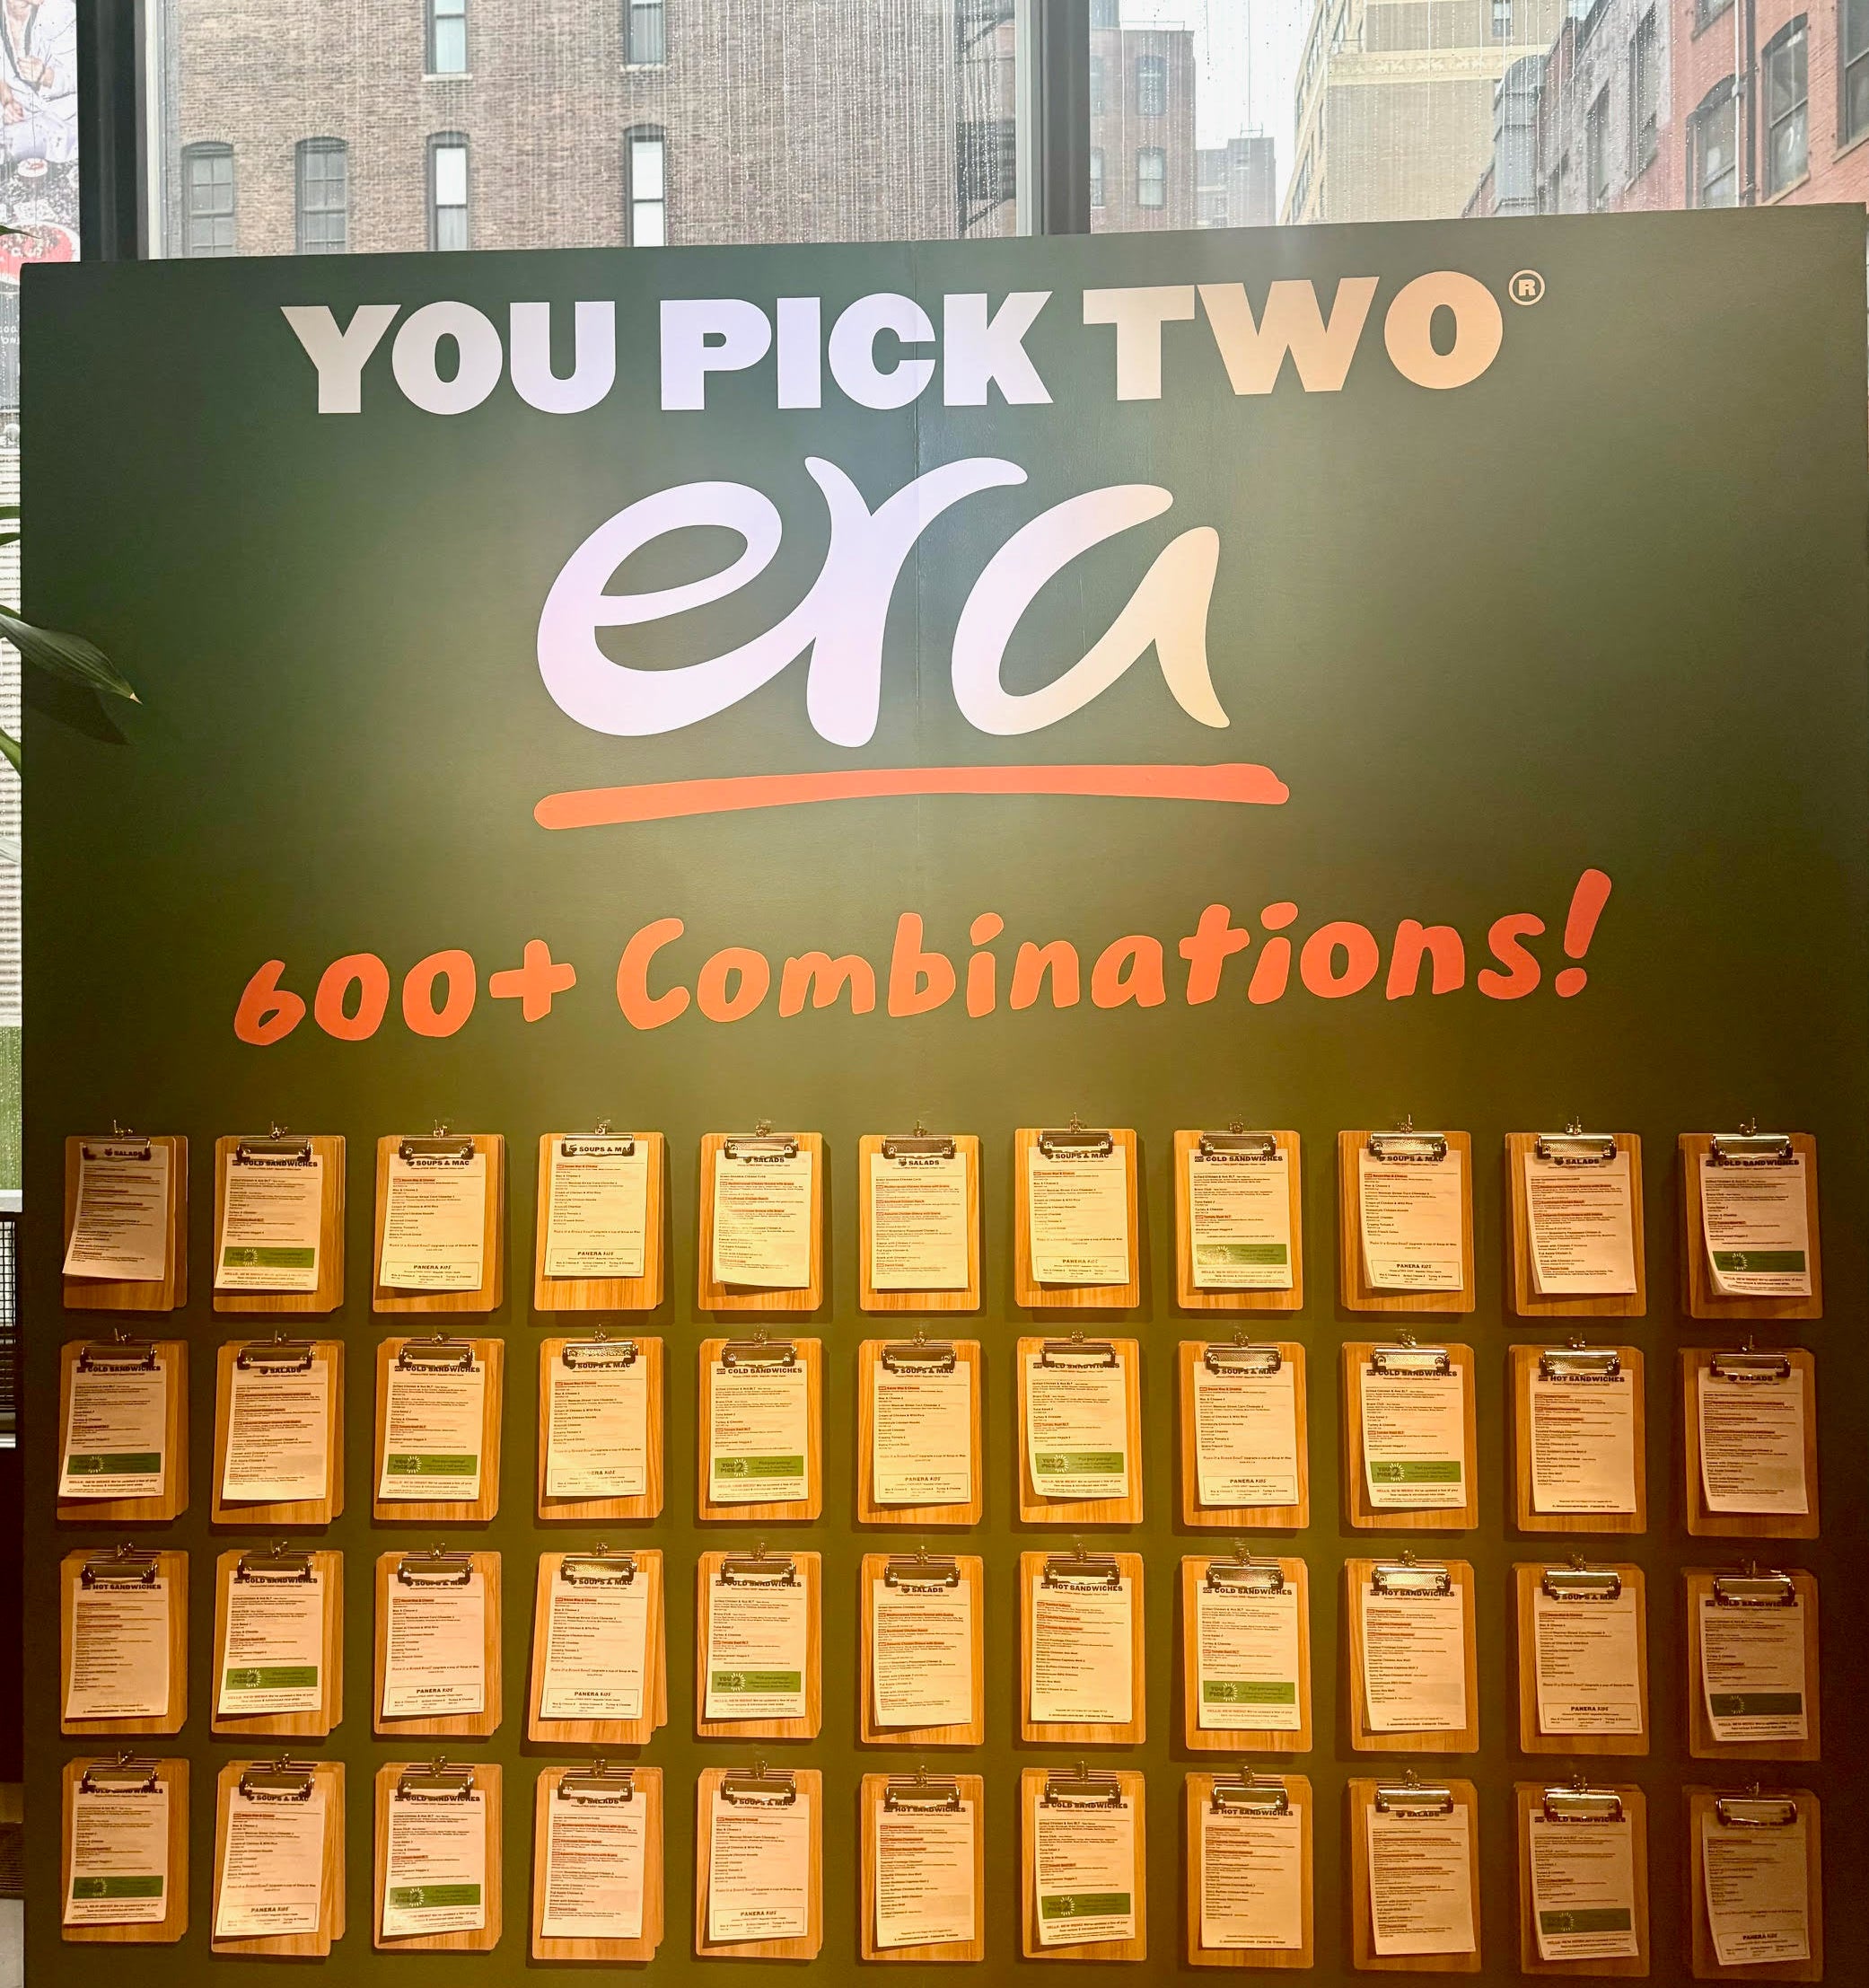 Board showcasing &#x27;YOU PICK TWO&#x27; and &#x27;600+ Combinations!&#x27; with multiple menu options below